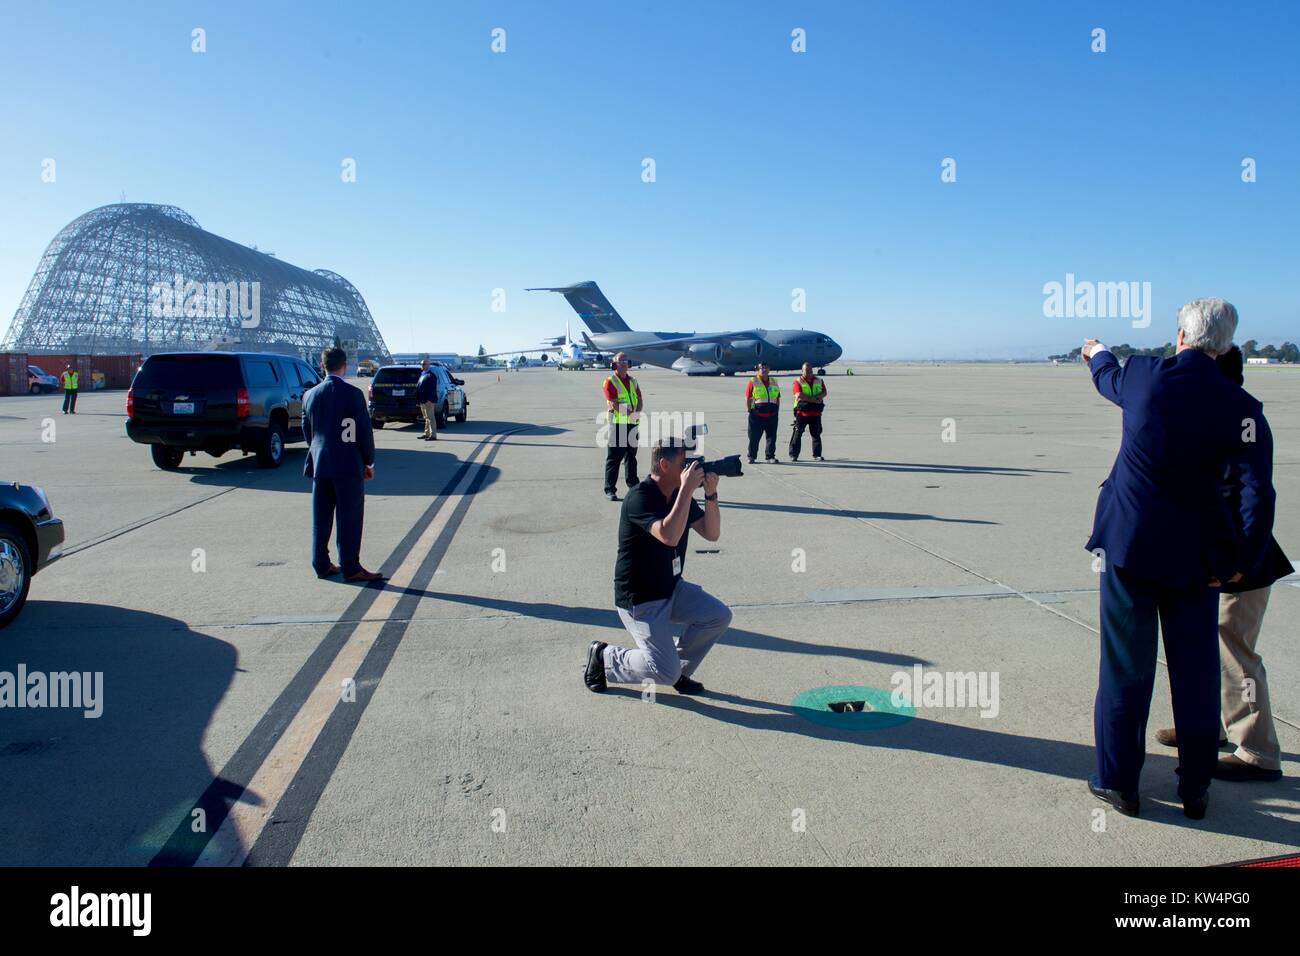 US Secretary of State John Kerry points to the skeleton of Hangar One after landing at Moffett Field in Mountain View, California, following a flight from Andrews Air Force Base in Camp Springs, Maryland, so he can attend events around the Global Entrepreneurial Summit at Stanford University in Palo Alto, California, June 22, 2016. Image courtesy US Department of State. Stock Photo